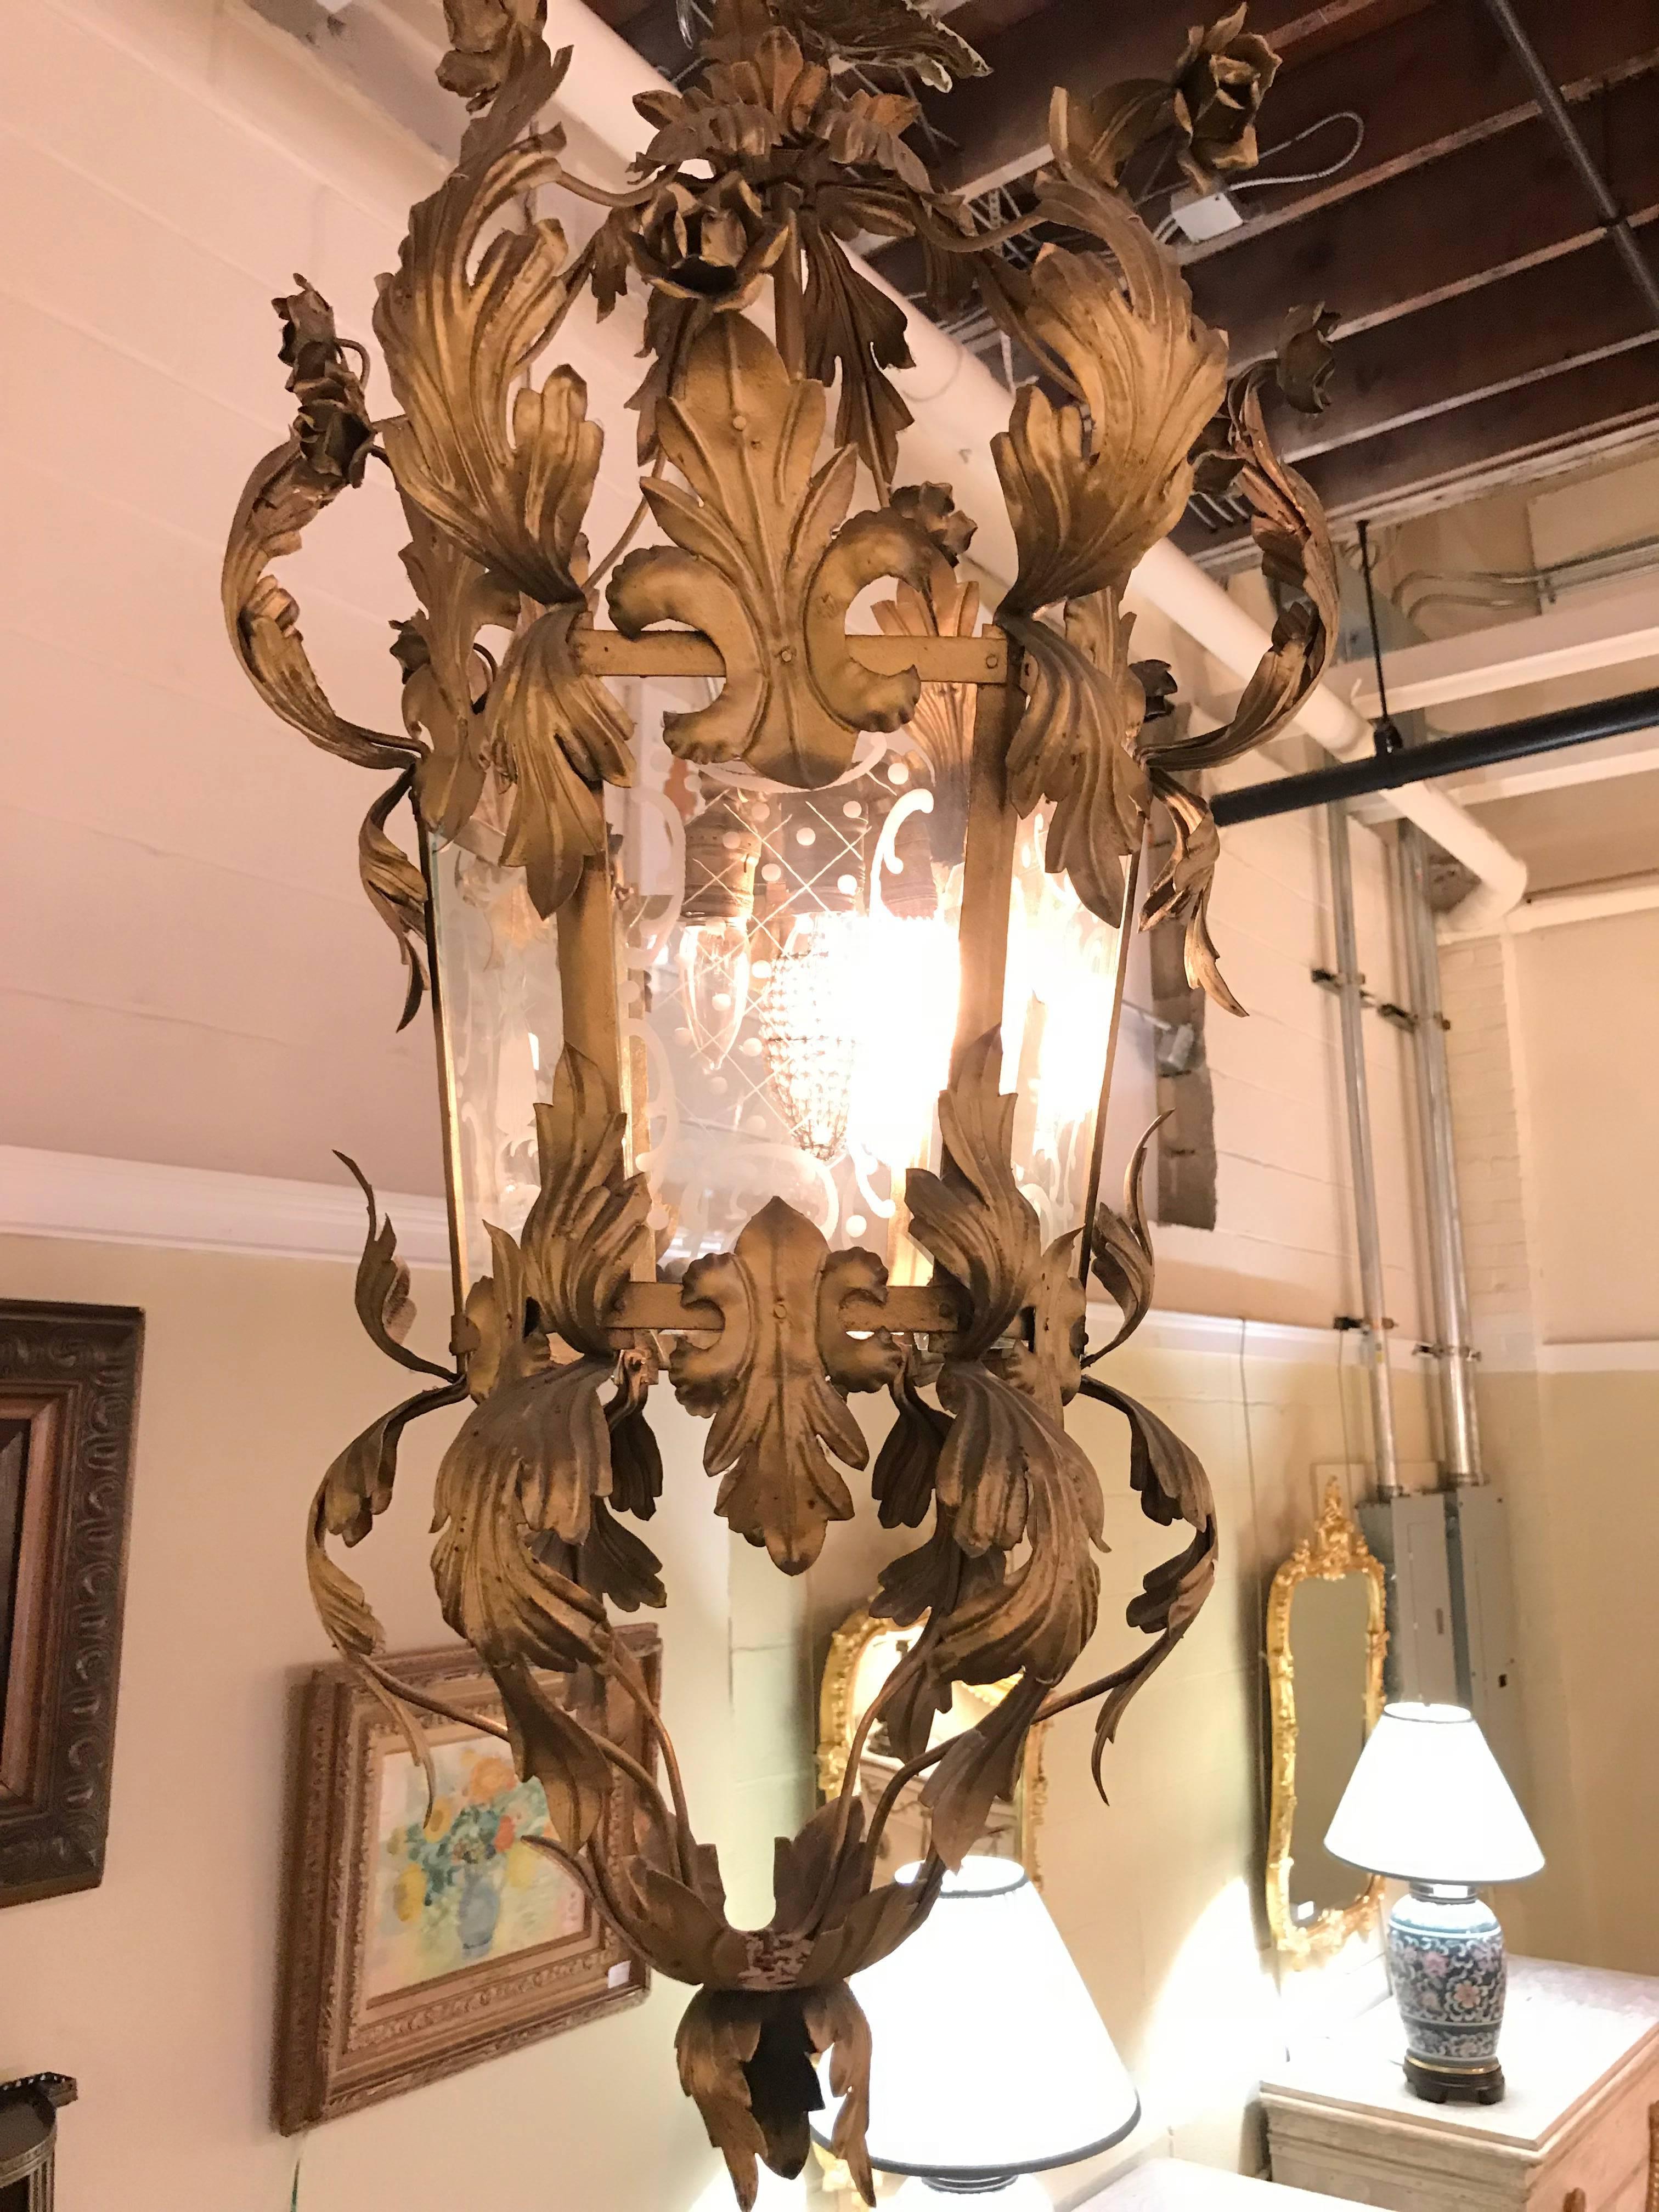 Gilt metal etched glass hanging lantern. This Mid-Century Modern lantern is finely decorated with a gilt metal scroll and vine design having etched glass panels.